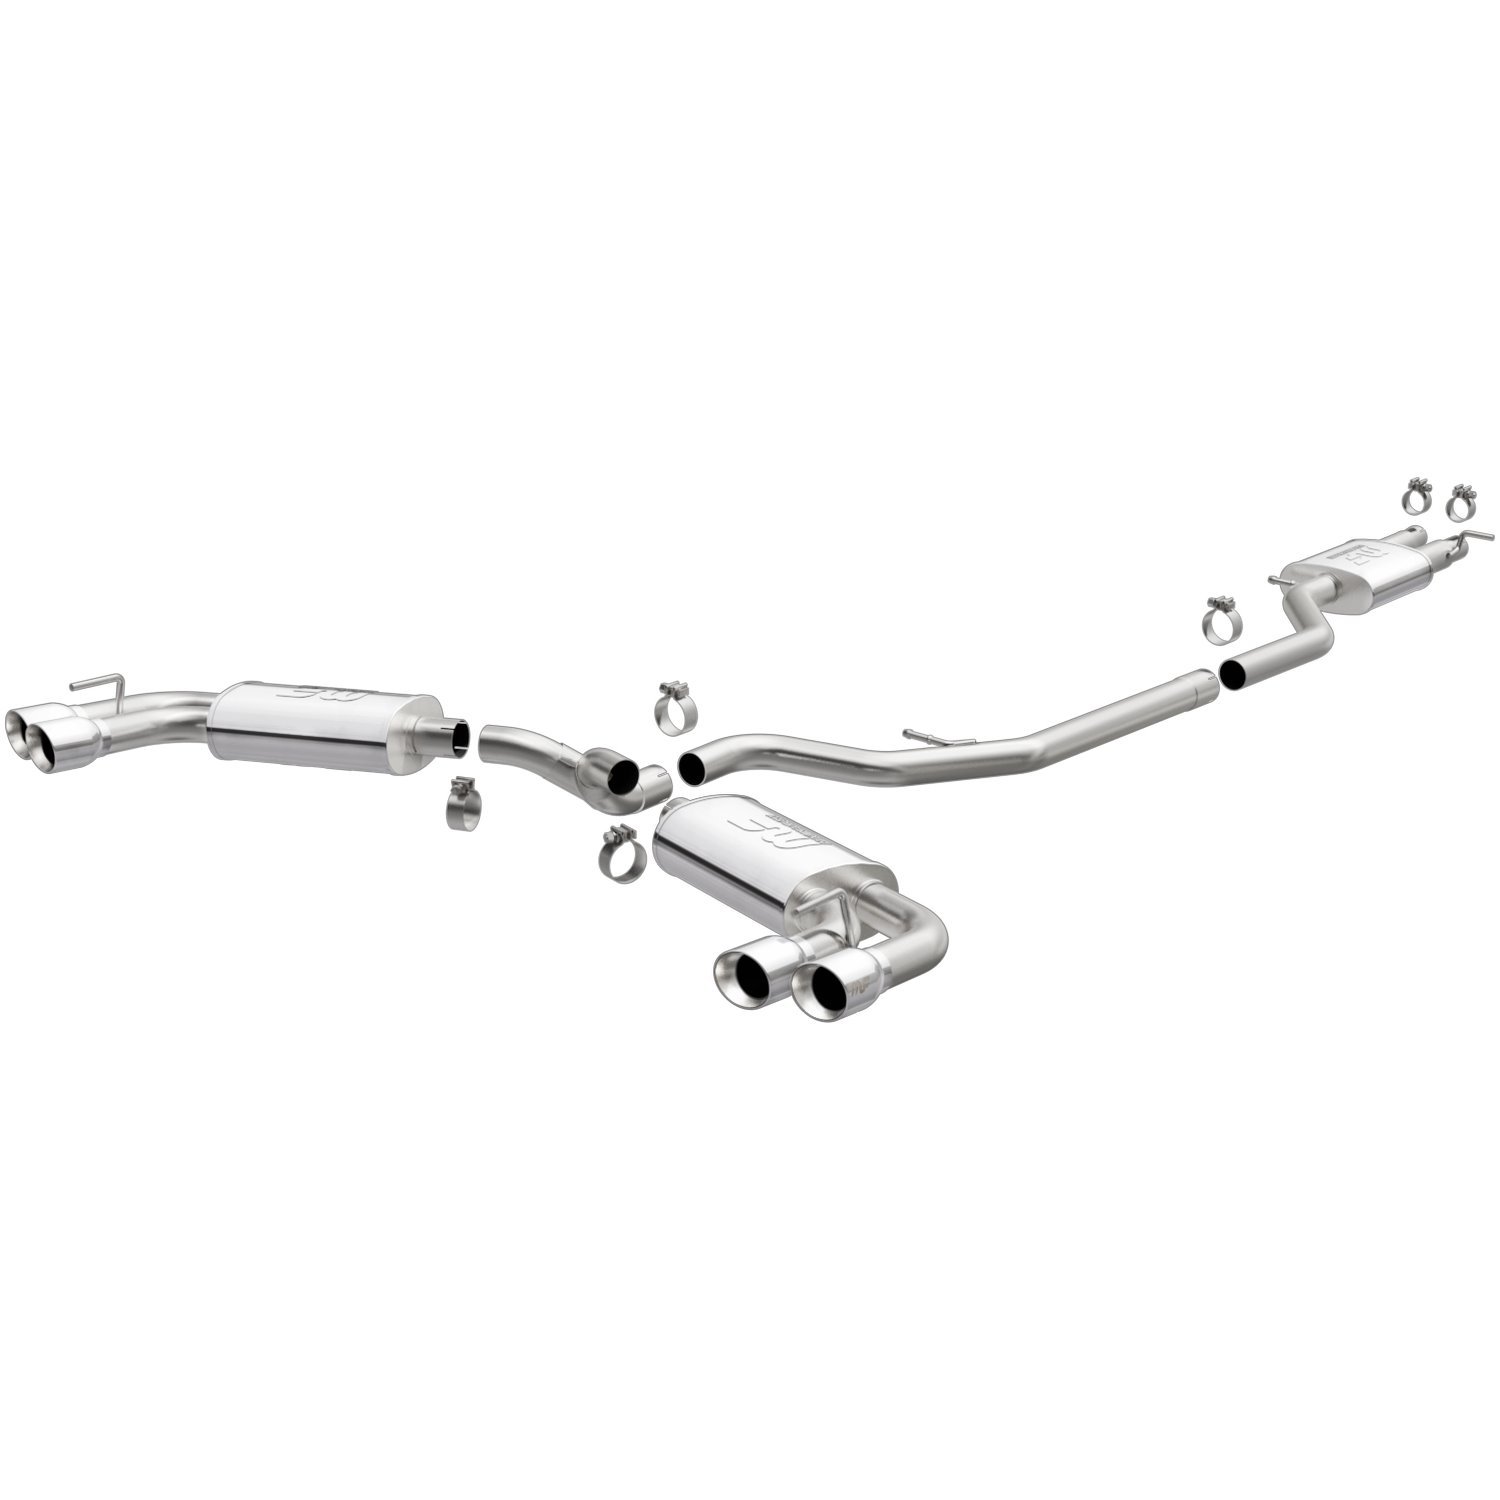 Street Series Cat-Back Exhaust System Fits Select Chevy Blazer RS 3.6L - Quad Split Rear - Polished Tips